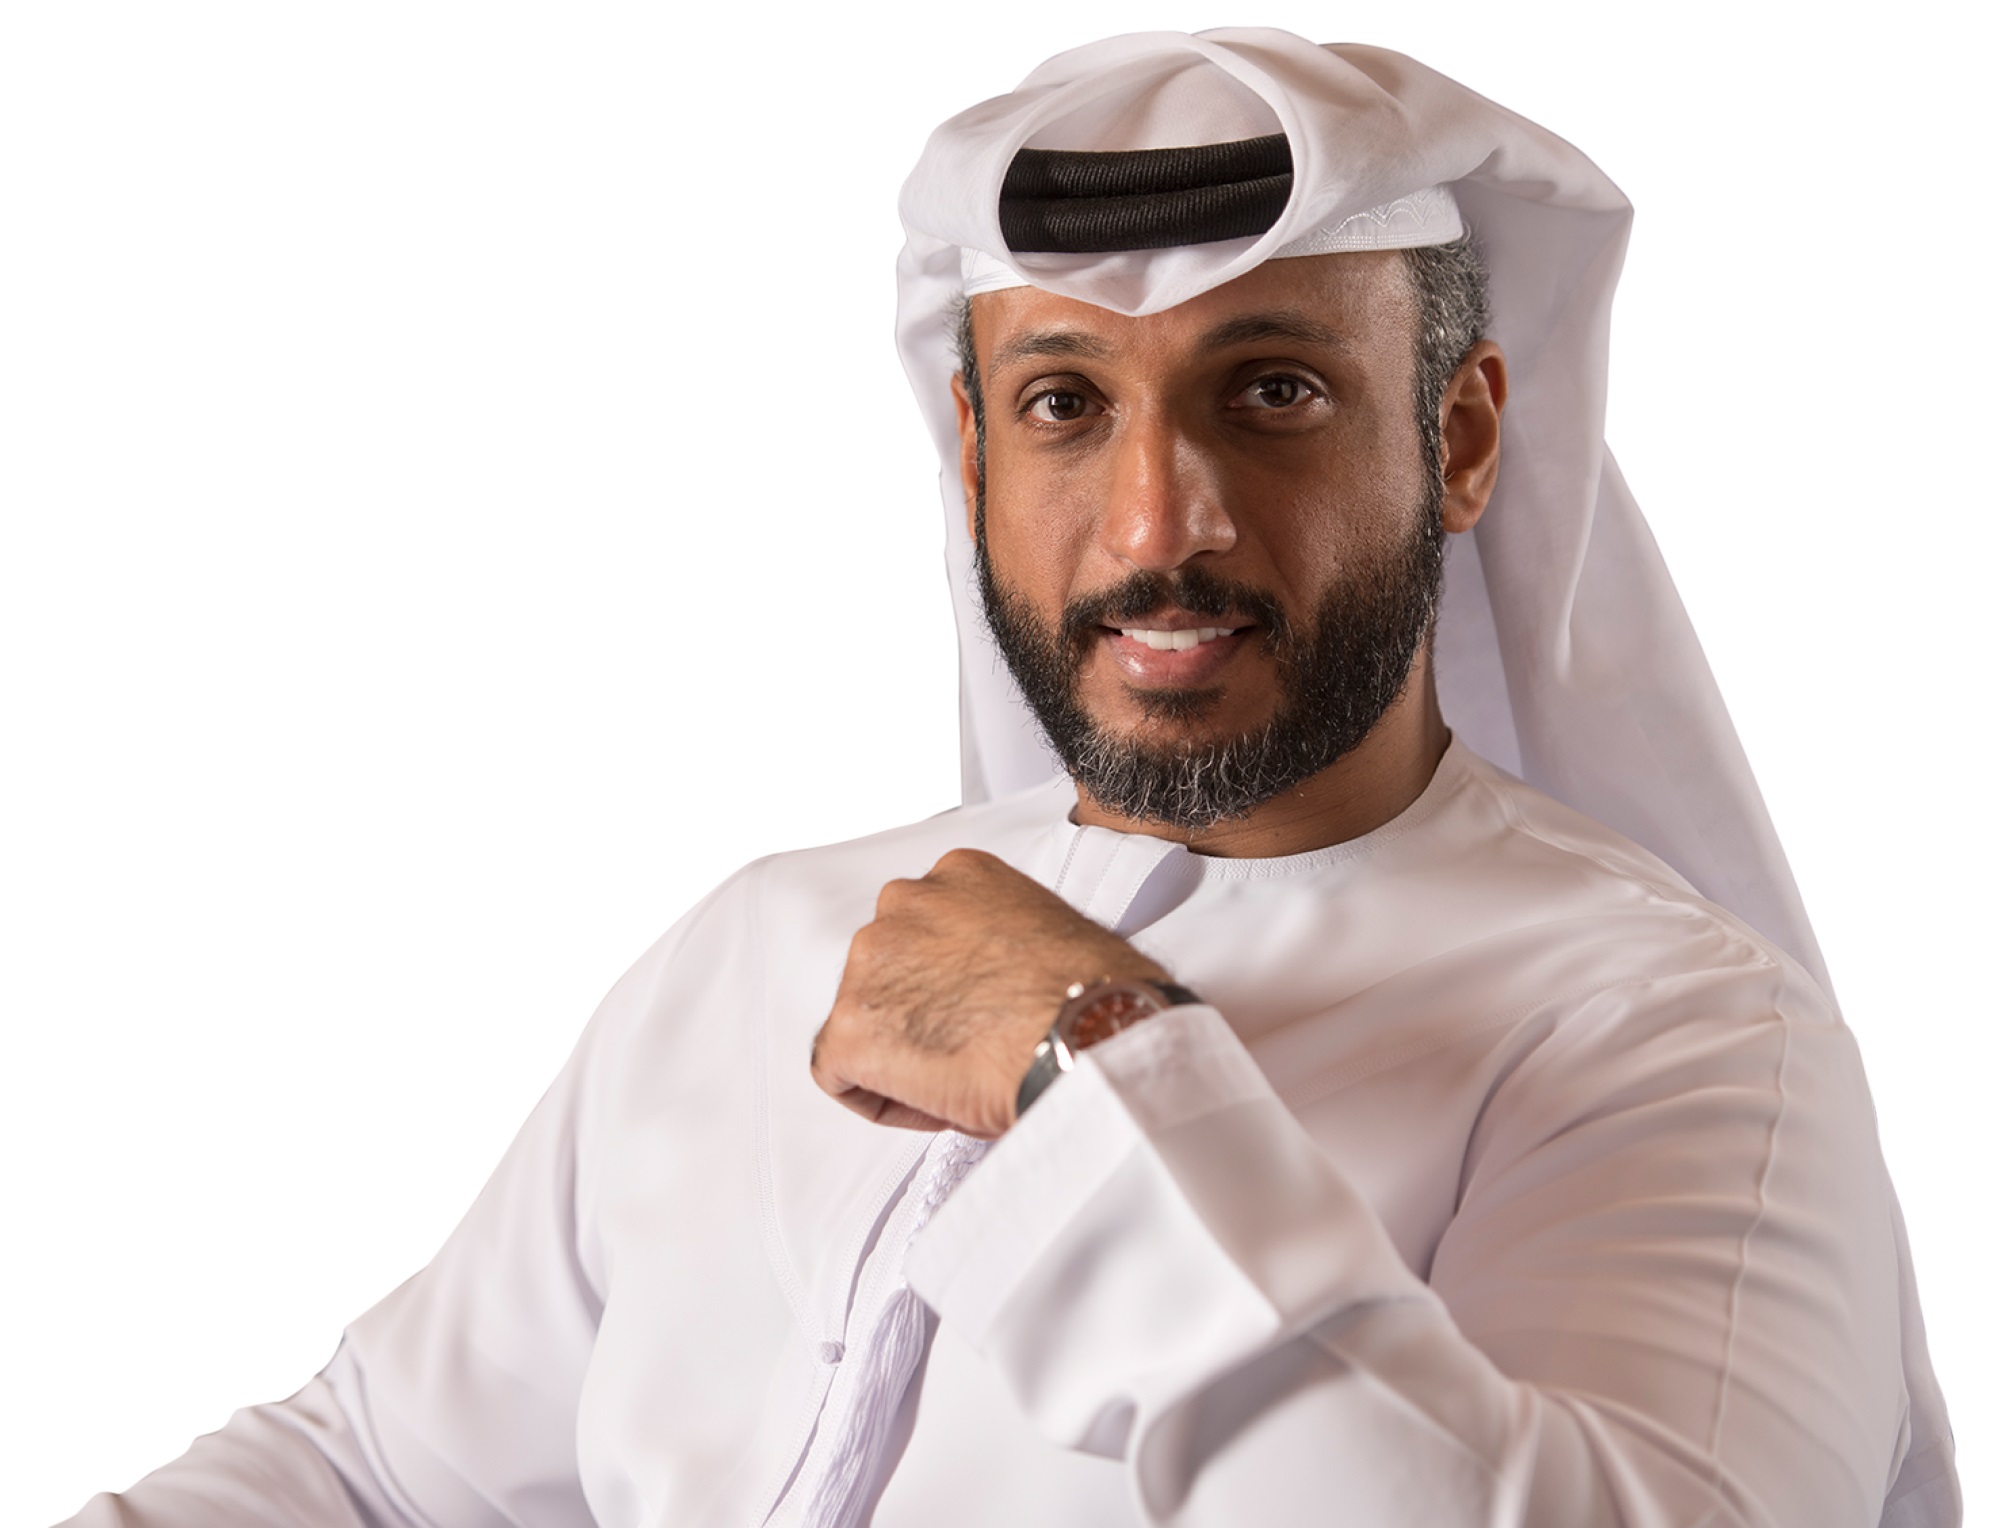 Alpha Dhabi Holding Announces Launch Of Hiring Round That Will See 2,500 Emirati Citizens Employed Within The Next 5 Years